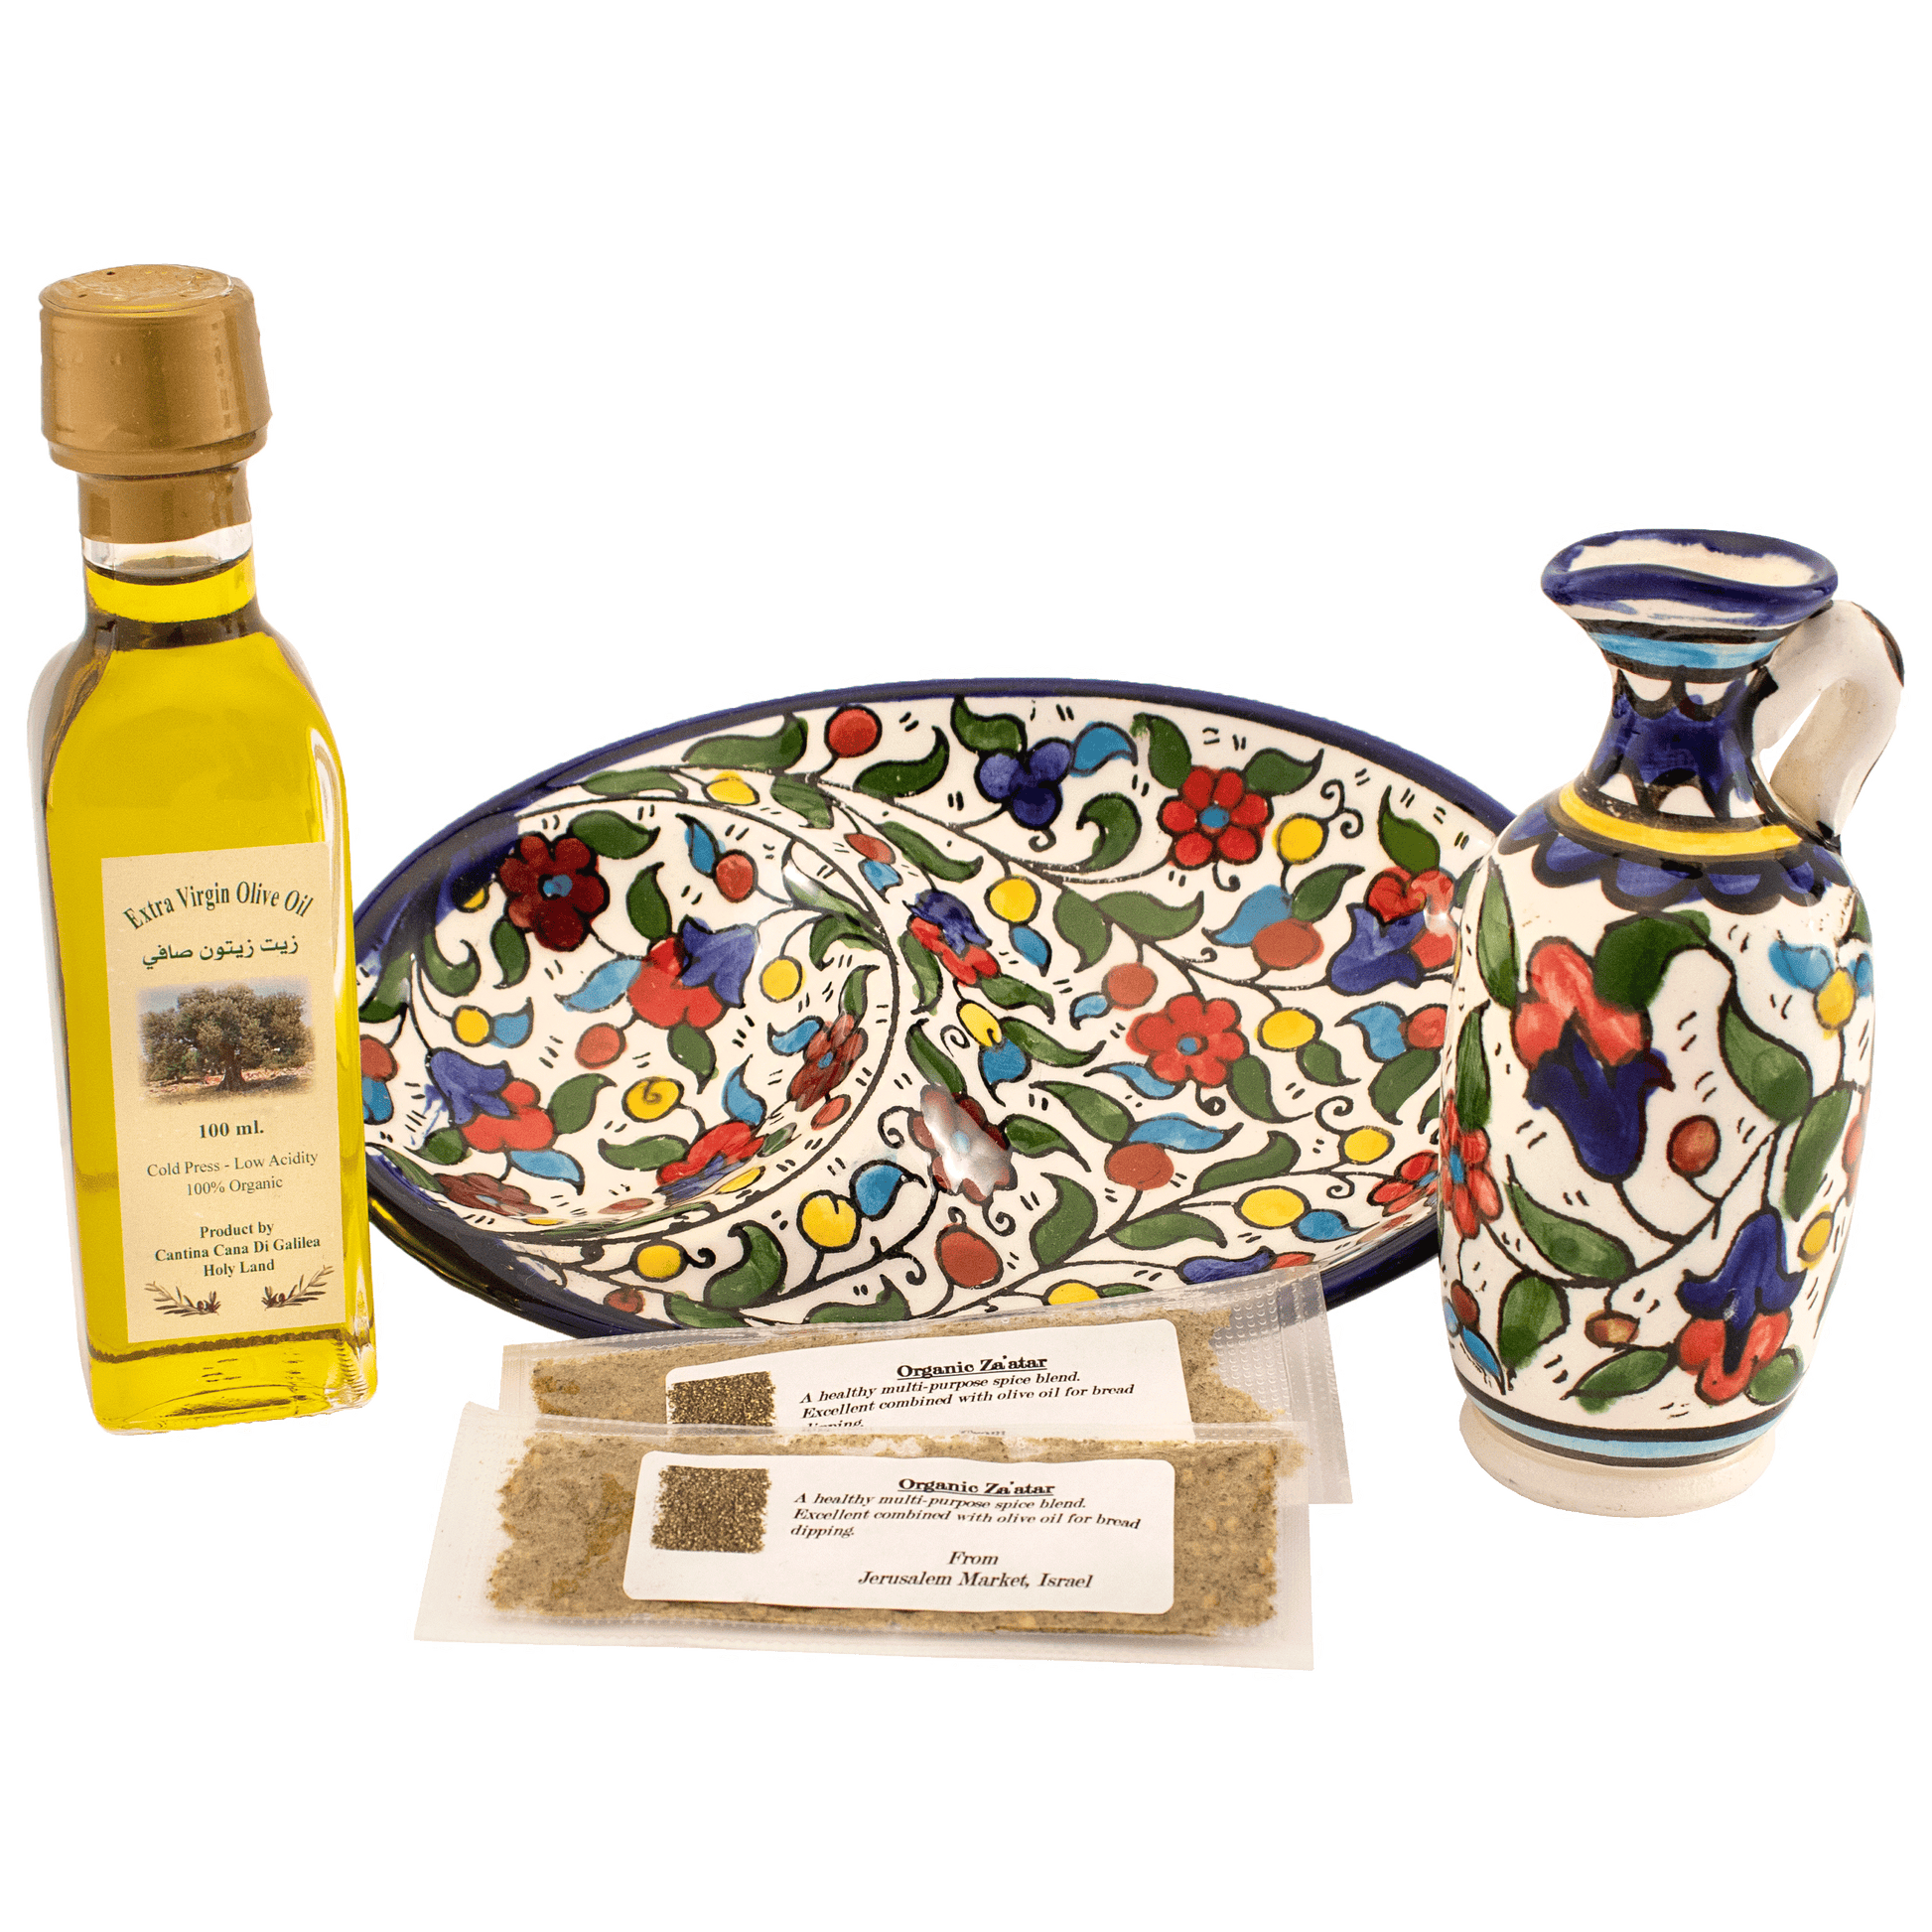 Armenian Dipping dish set with traditional floral designs, olive oil, and 2 sample Za'atar spice packets